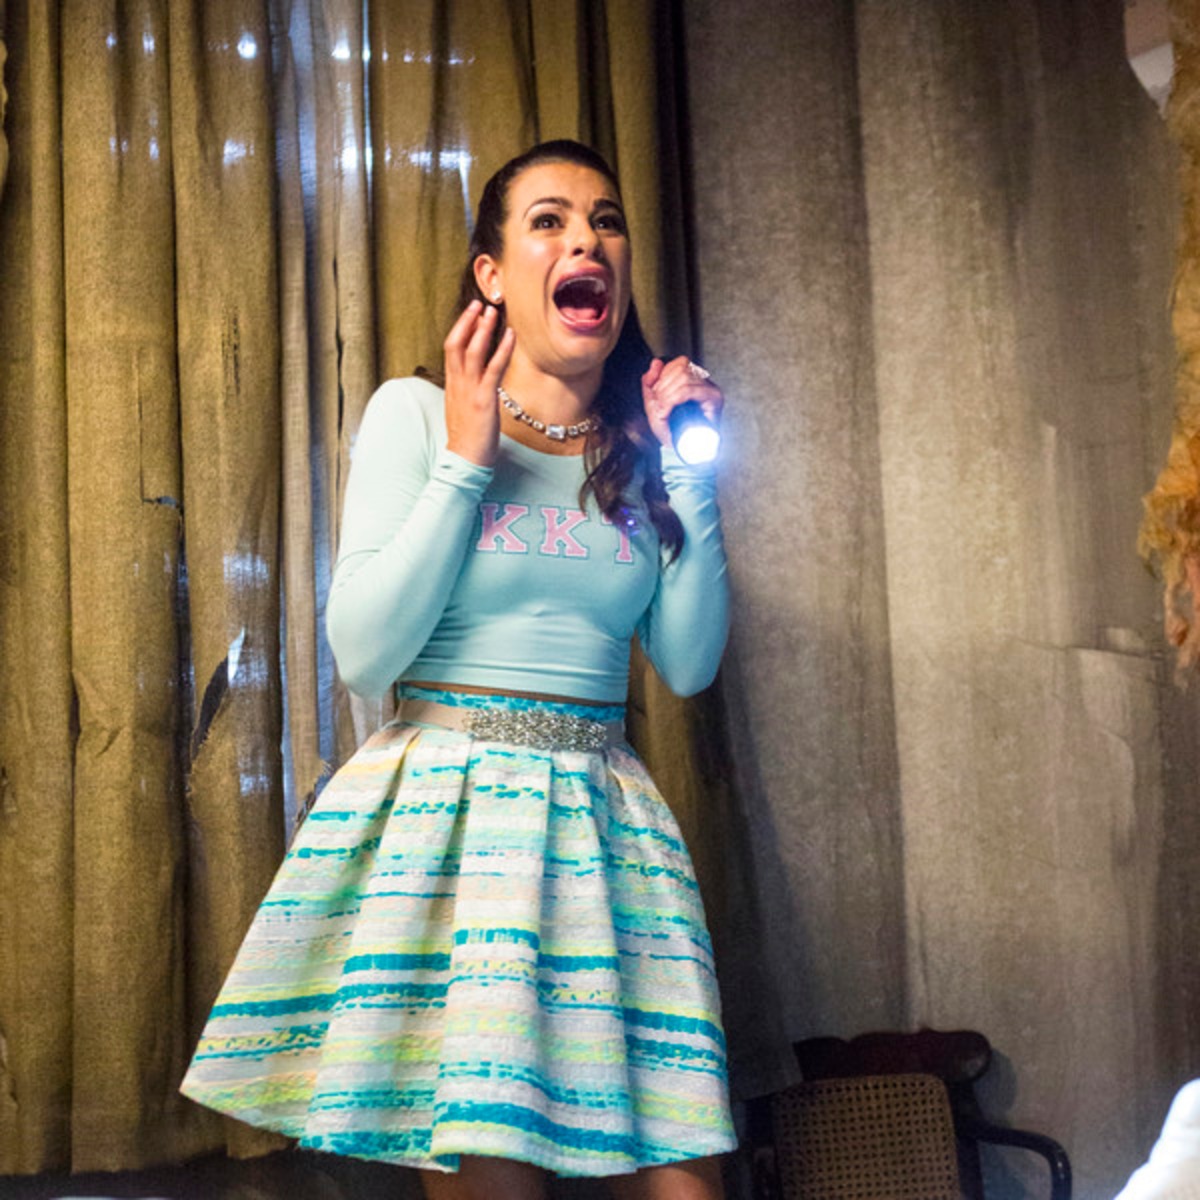 Scream Queens: Three More Deaths Are Coming - E! Online